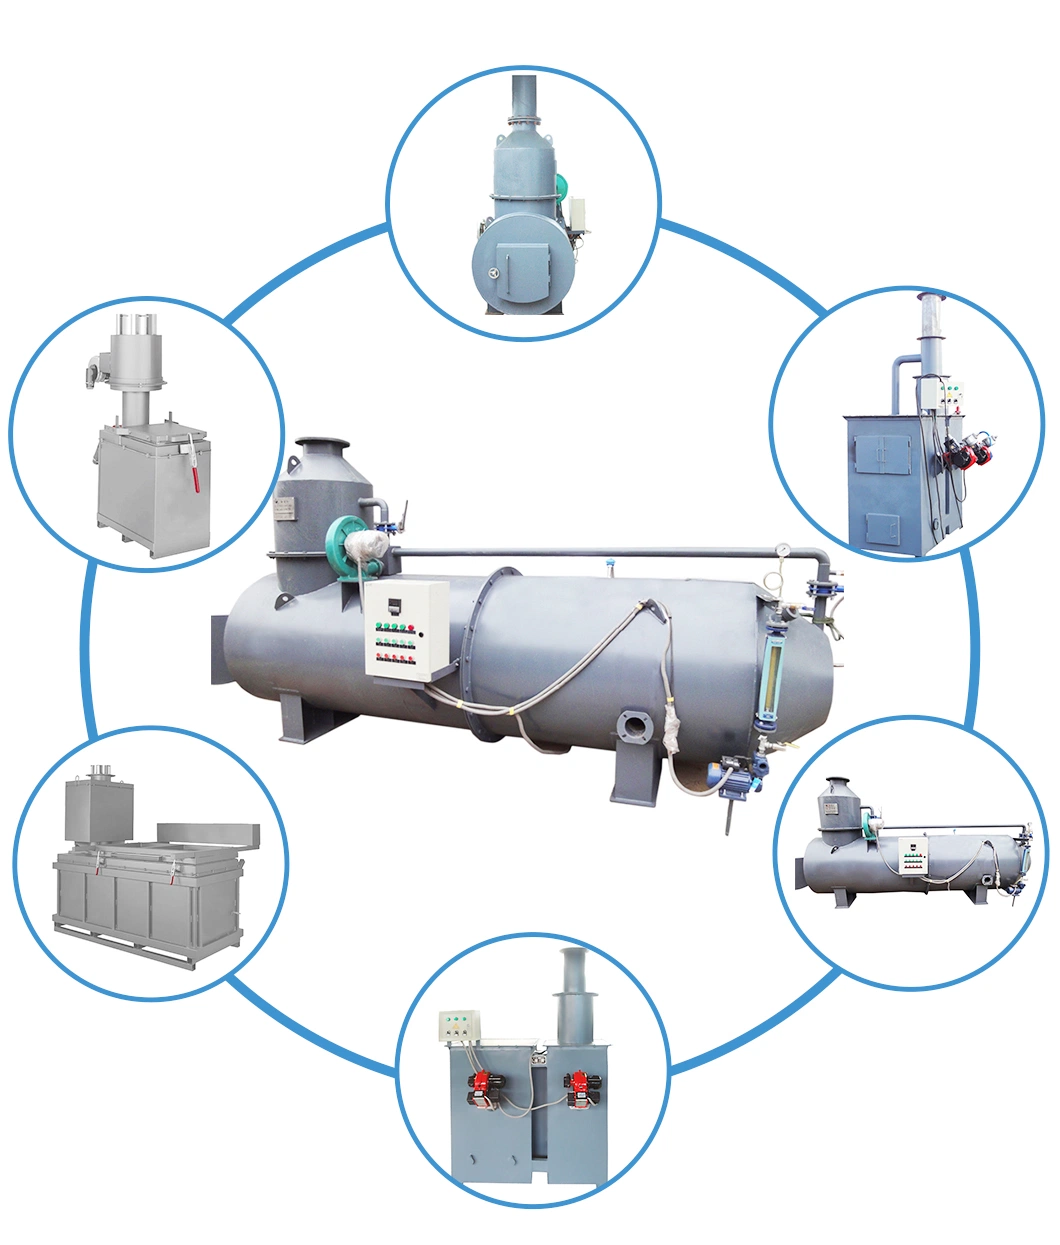 Waste Packaged Water Treatment Unit Domestic Wastewater Dissolved Air Flotation